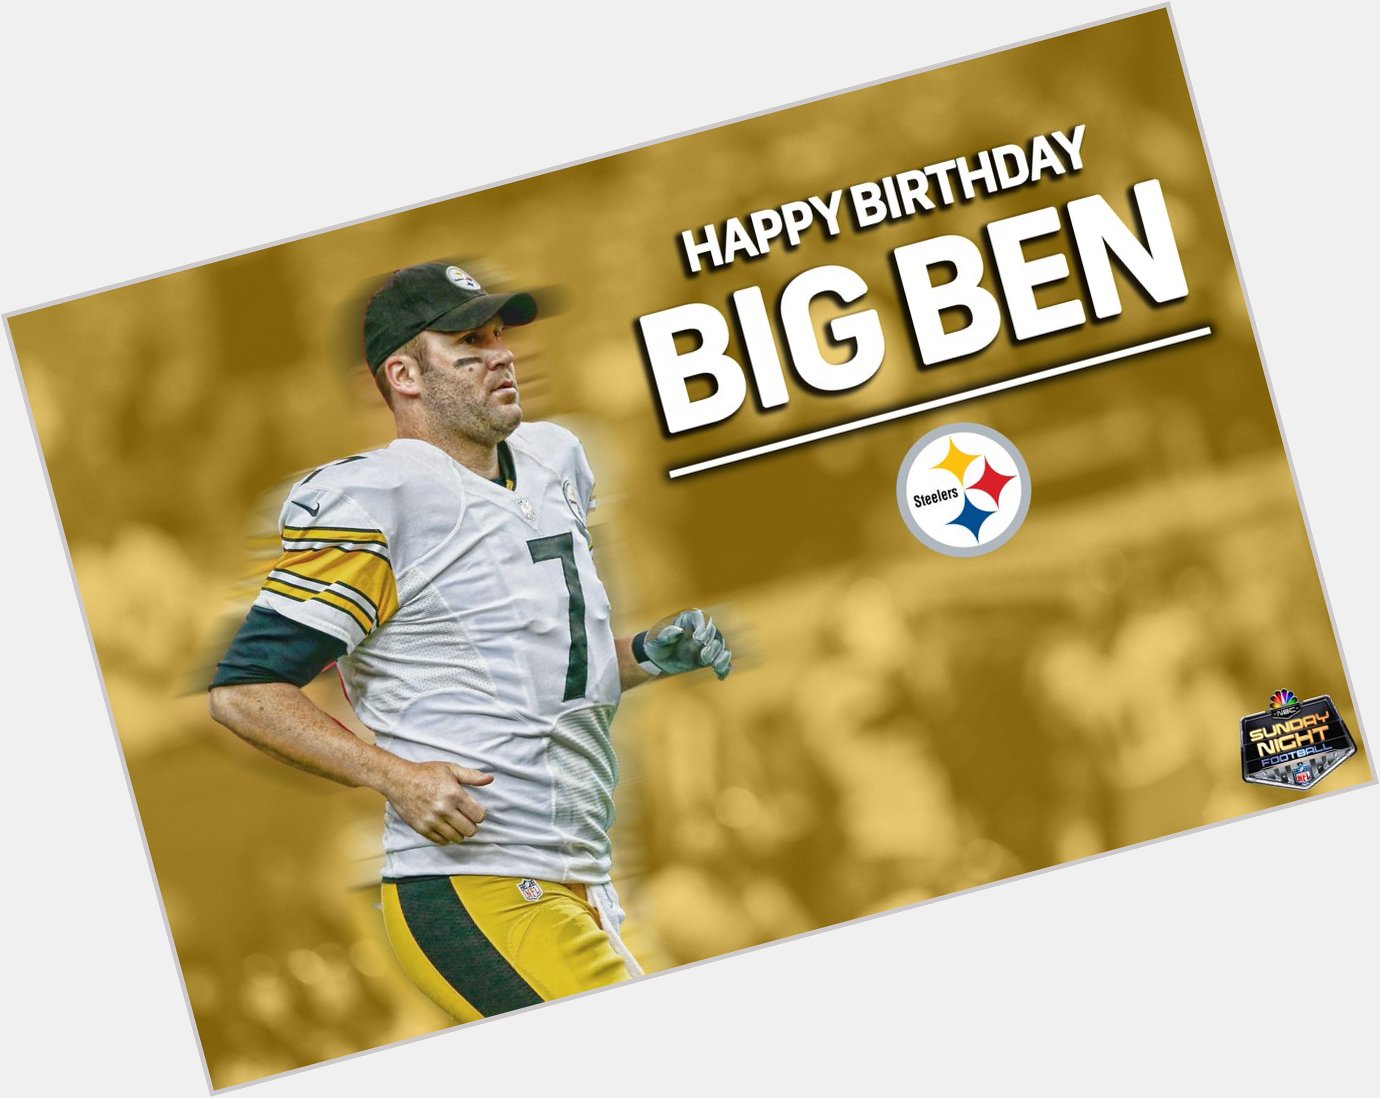 \" Happy Birthday Ben Roethlisberger!  
I hope he has a few drinks & gets on his motorcycle tonight.